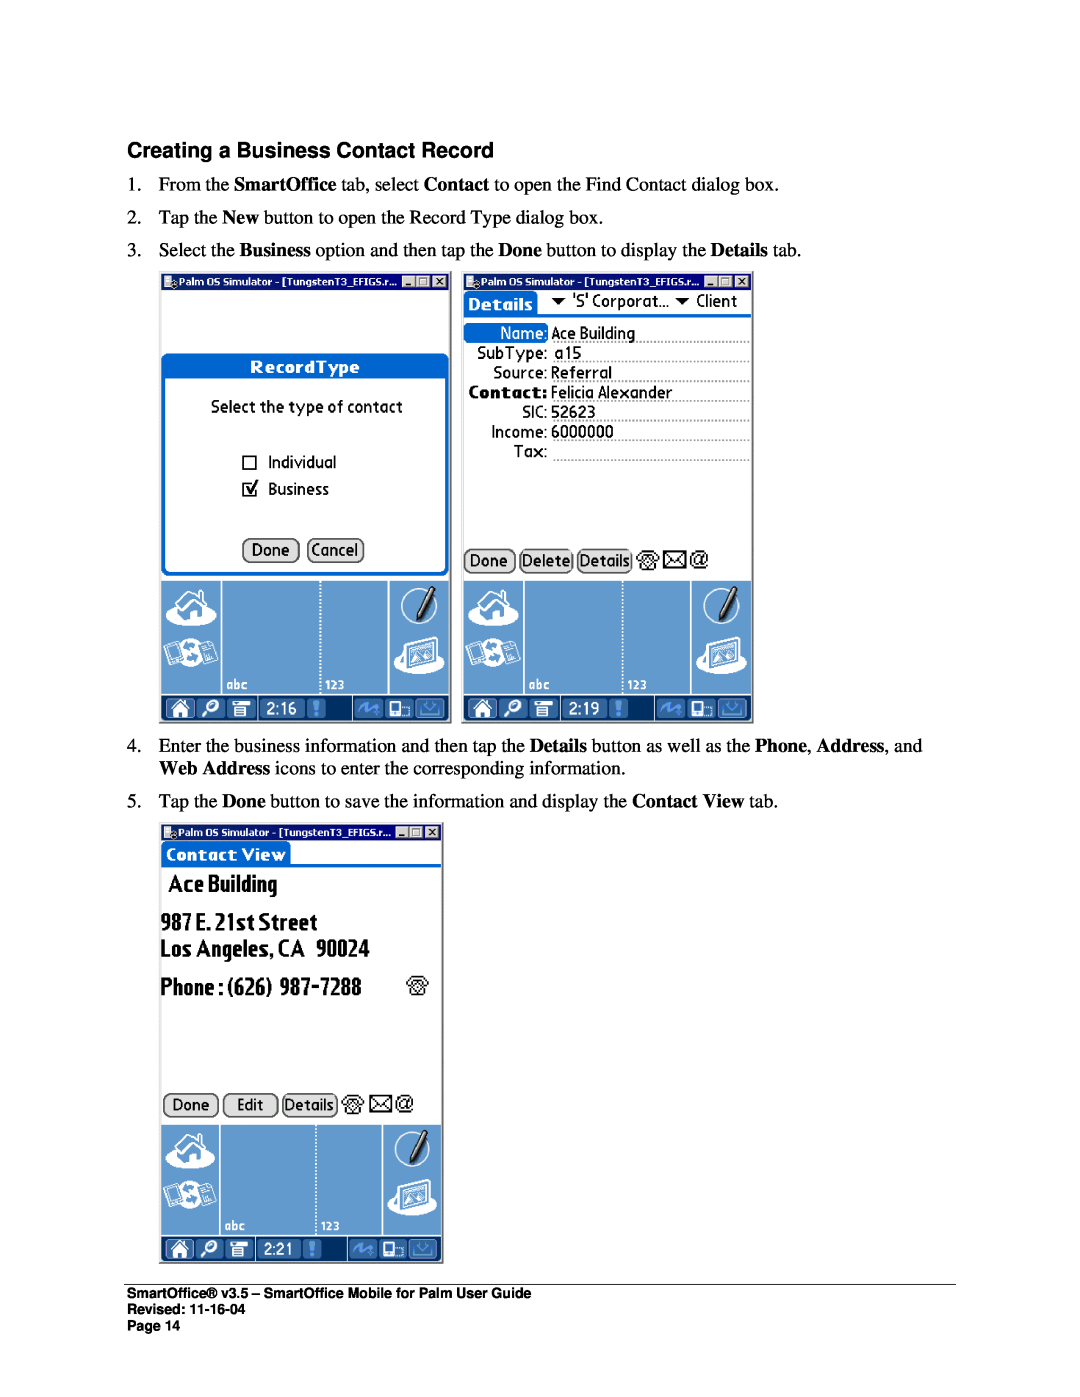 Palm SmartOffice Mobile manual Creating a Business Contact Record 